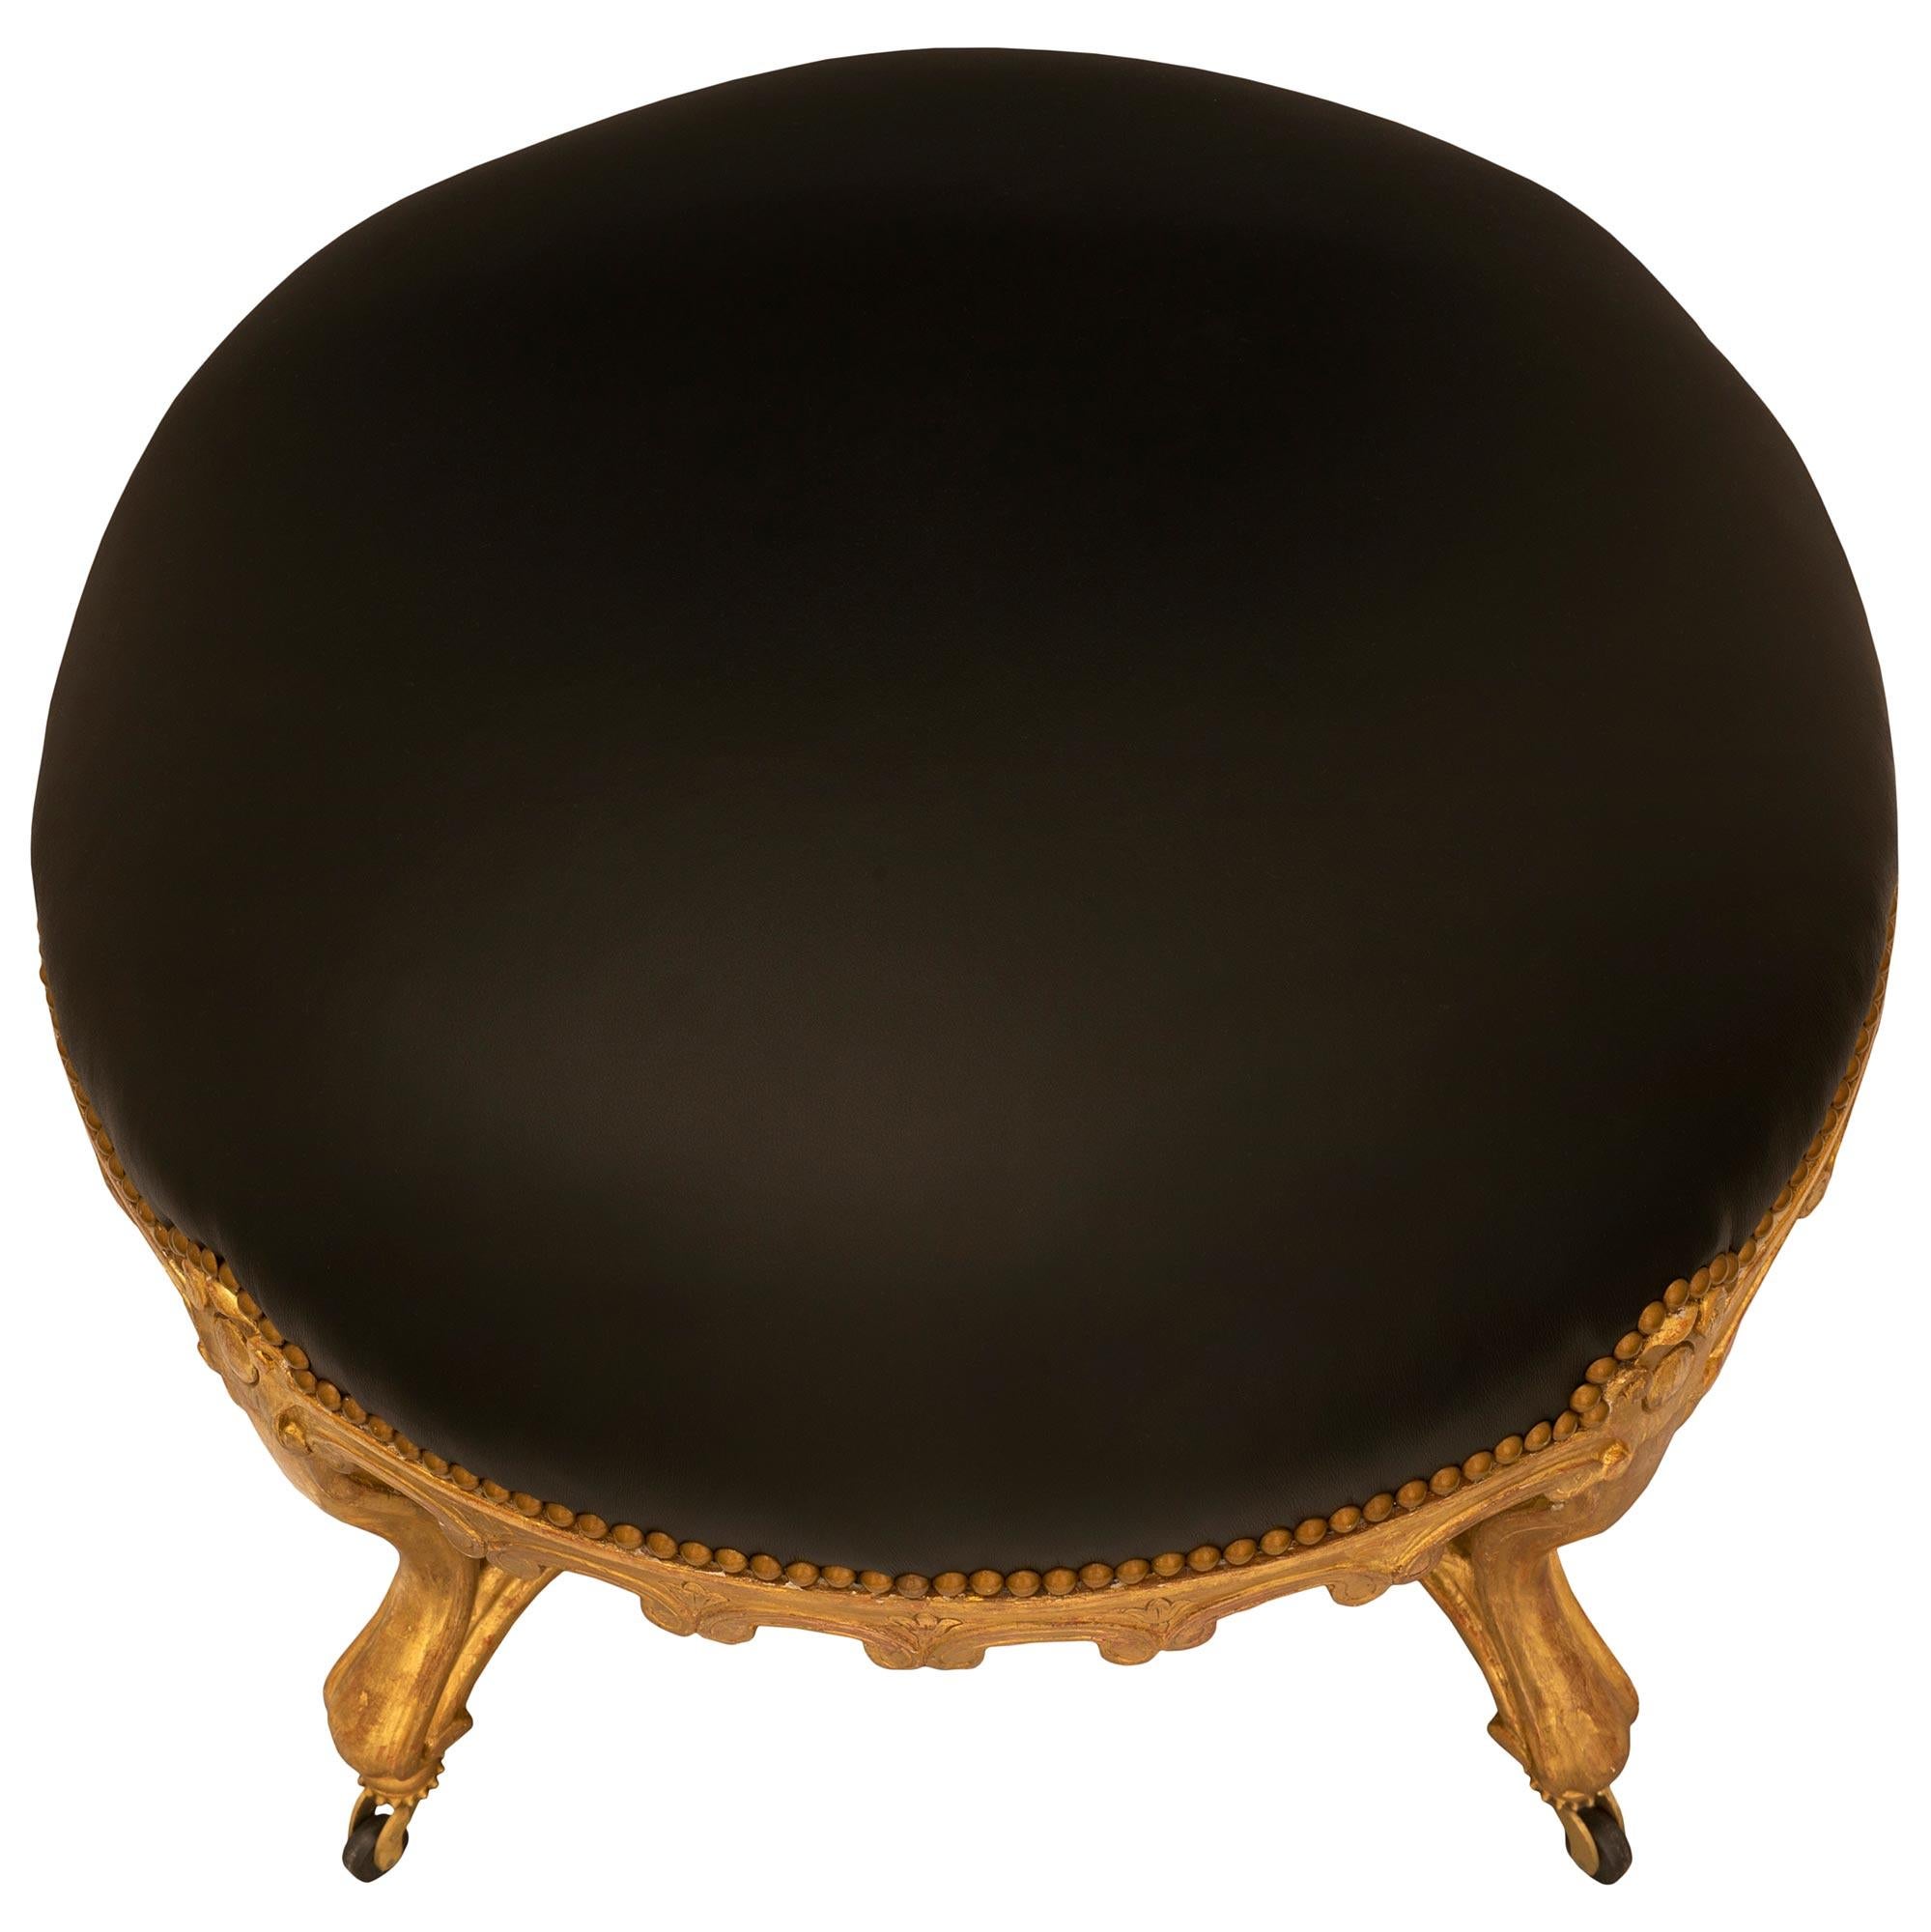 An elegant French 19th century Louis XV st. giltwood stool. The circular stool is raised by elegant casters with a fine wrap around beaded band below most decorative cabriole legs with carved mottled borders and each connected by a beautiful